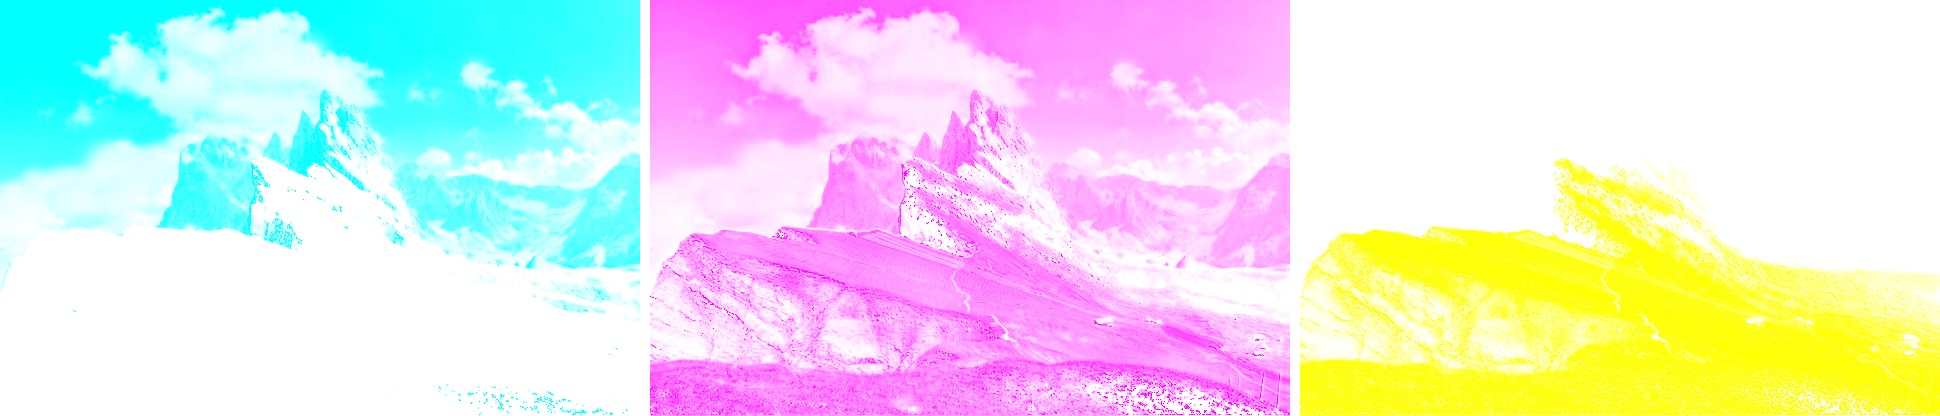 In this example, we split a mountain JPG picture into three separate CMY channels. The collection of output images show the amount of "cyan", "magenta", and "yellow" colors in the original picture. (Source: Pexels.)